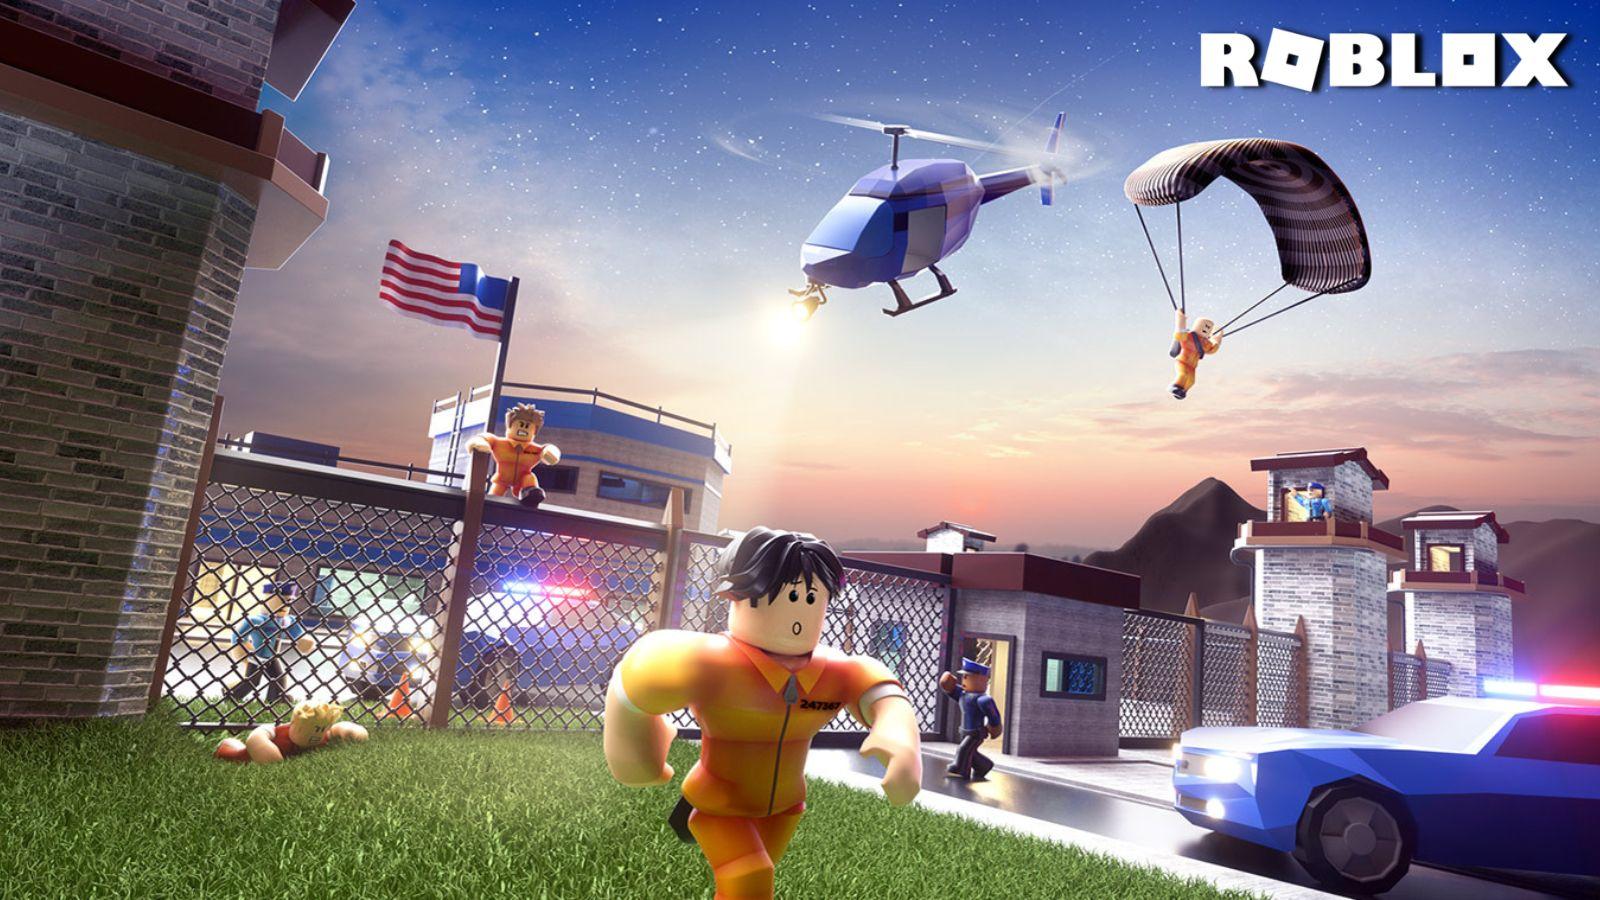 Roblox adds strict new anti-cheat and hackers are mad about it